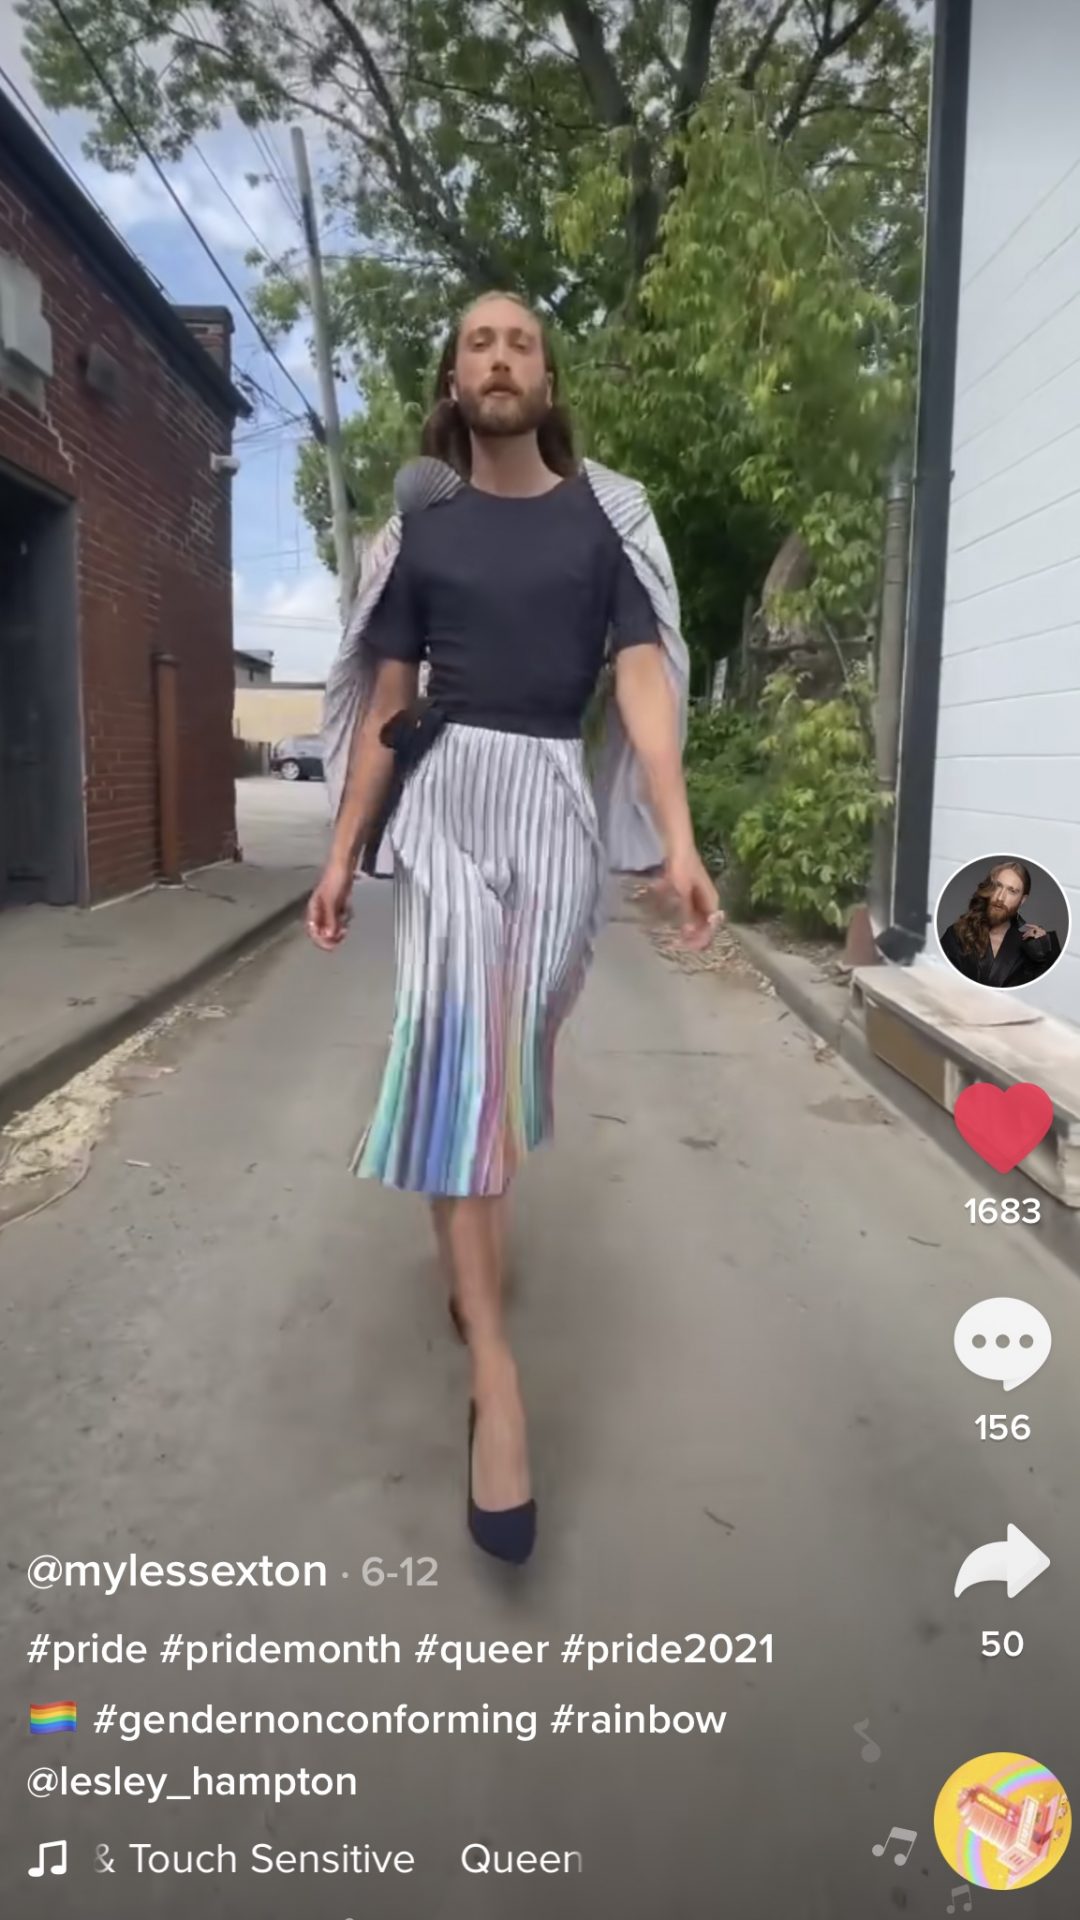 Screenshot image of a non-binary TikTok influencer wearing a black T-shirt, rainbow cape, and a matching rainbow pleated skirt with black heels walking down an alley